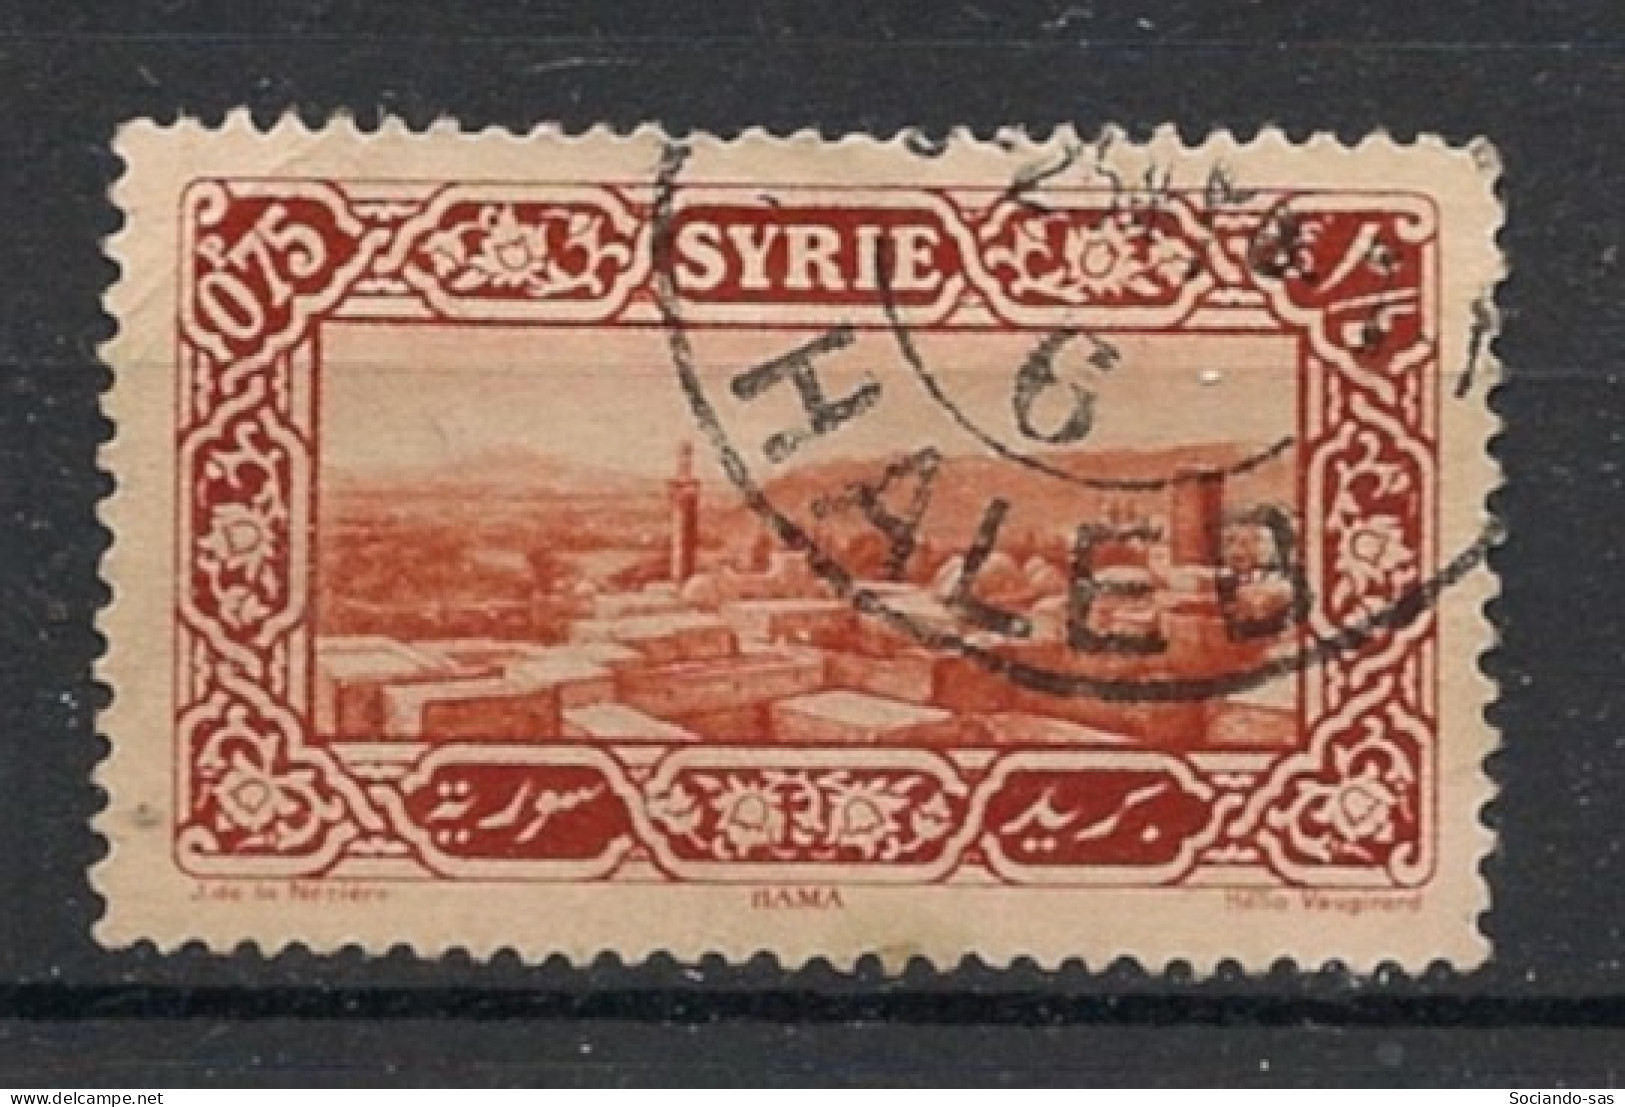 SYRIE - 1925 - N°YT. 157 - Hama 0pi75 Rouge - Oblitéré / Used - Used Stamps